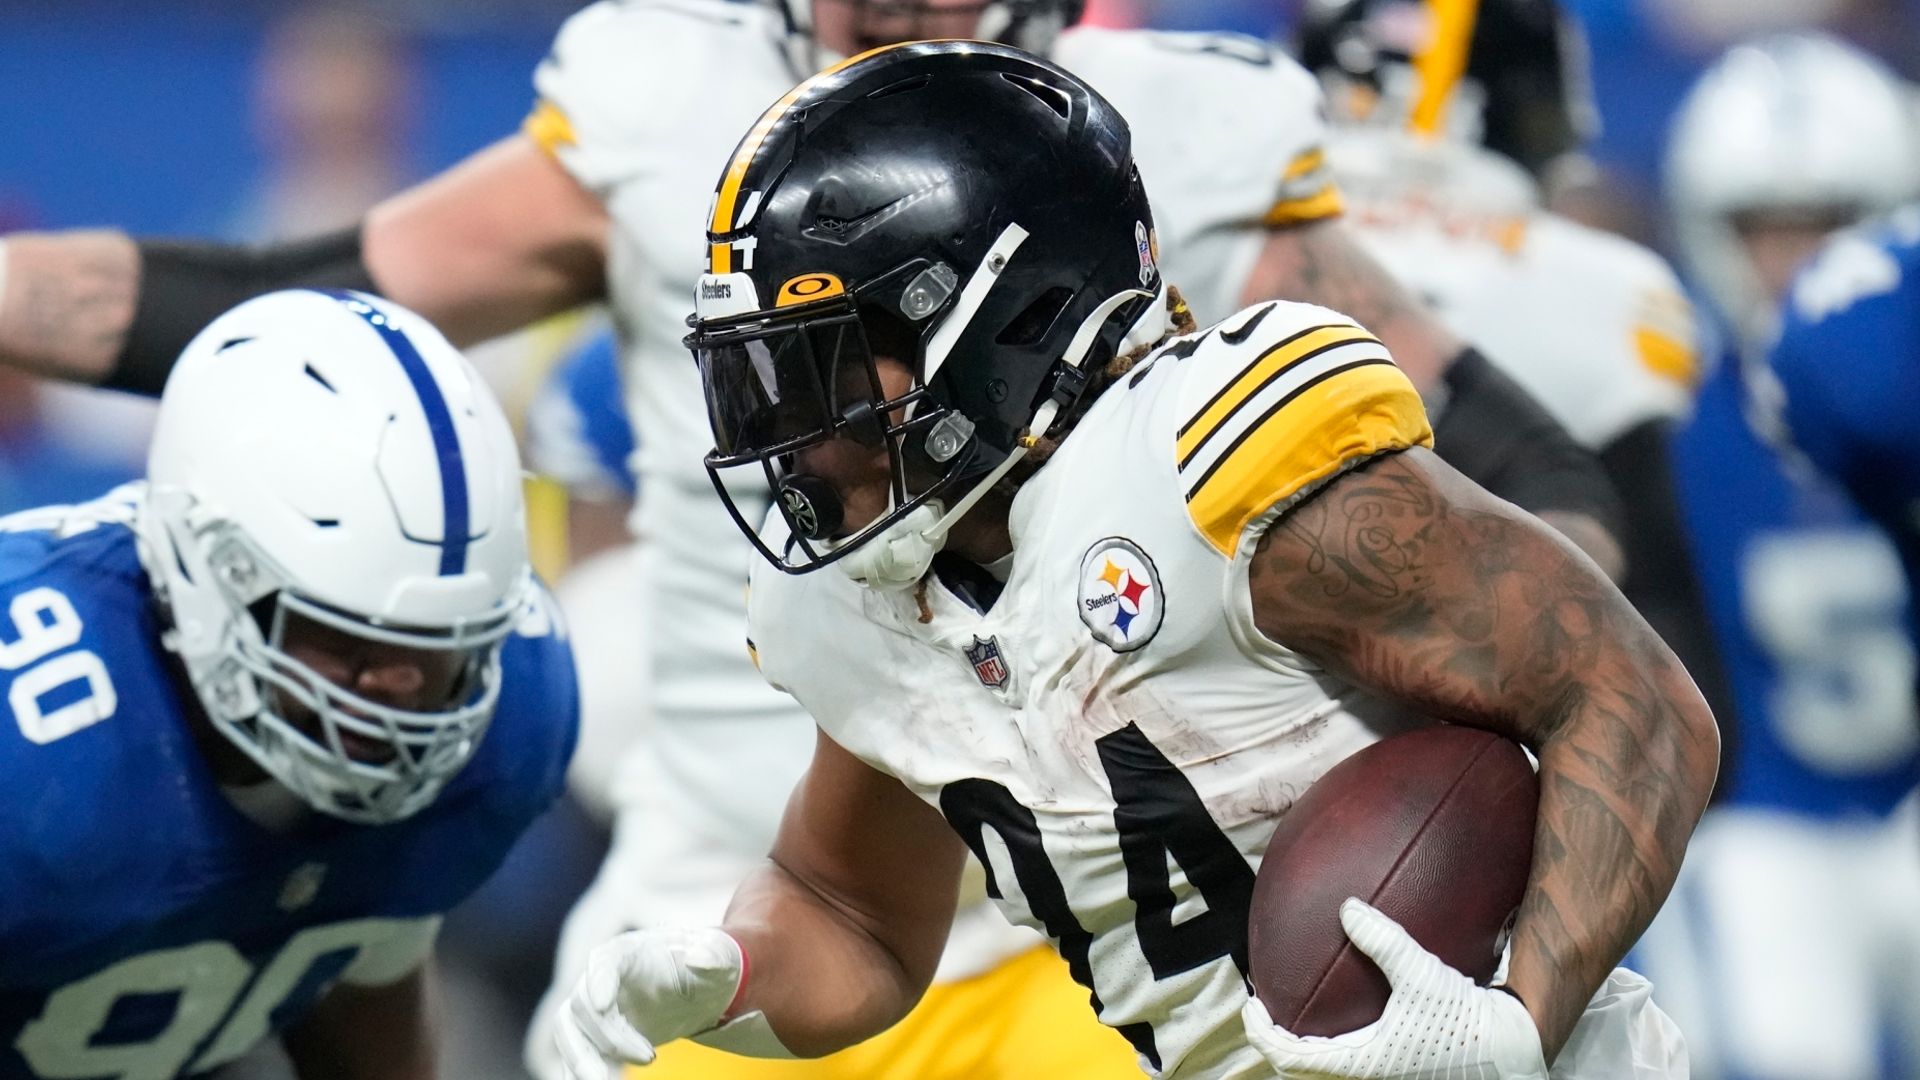 Steelers fend off last-minute Colts comeback to clinch Monday night win